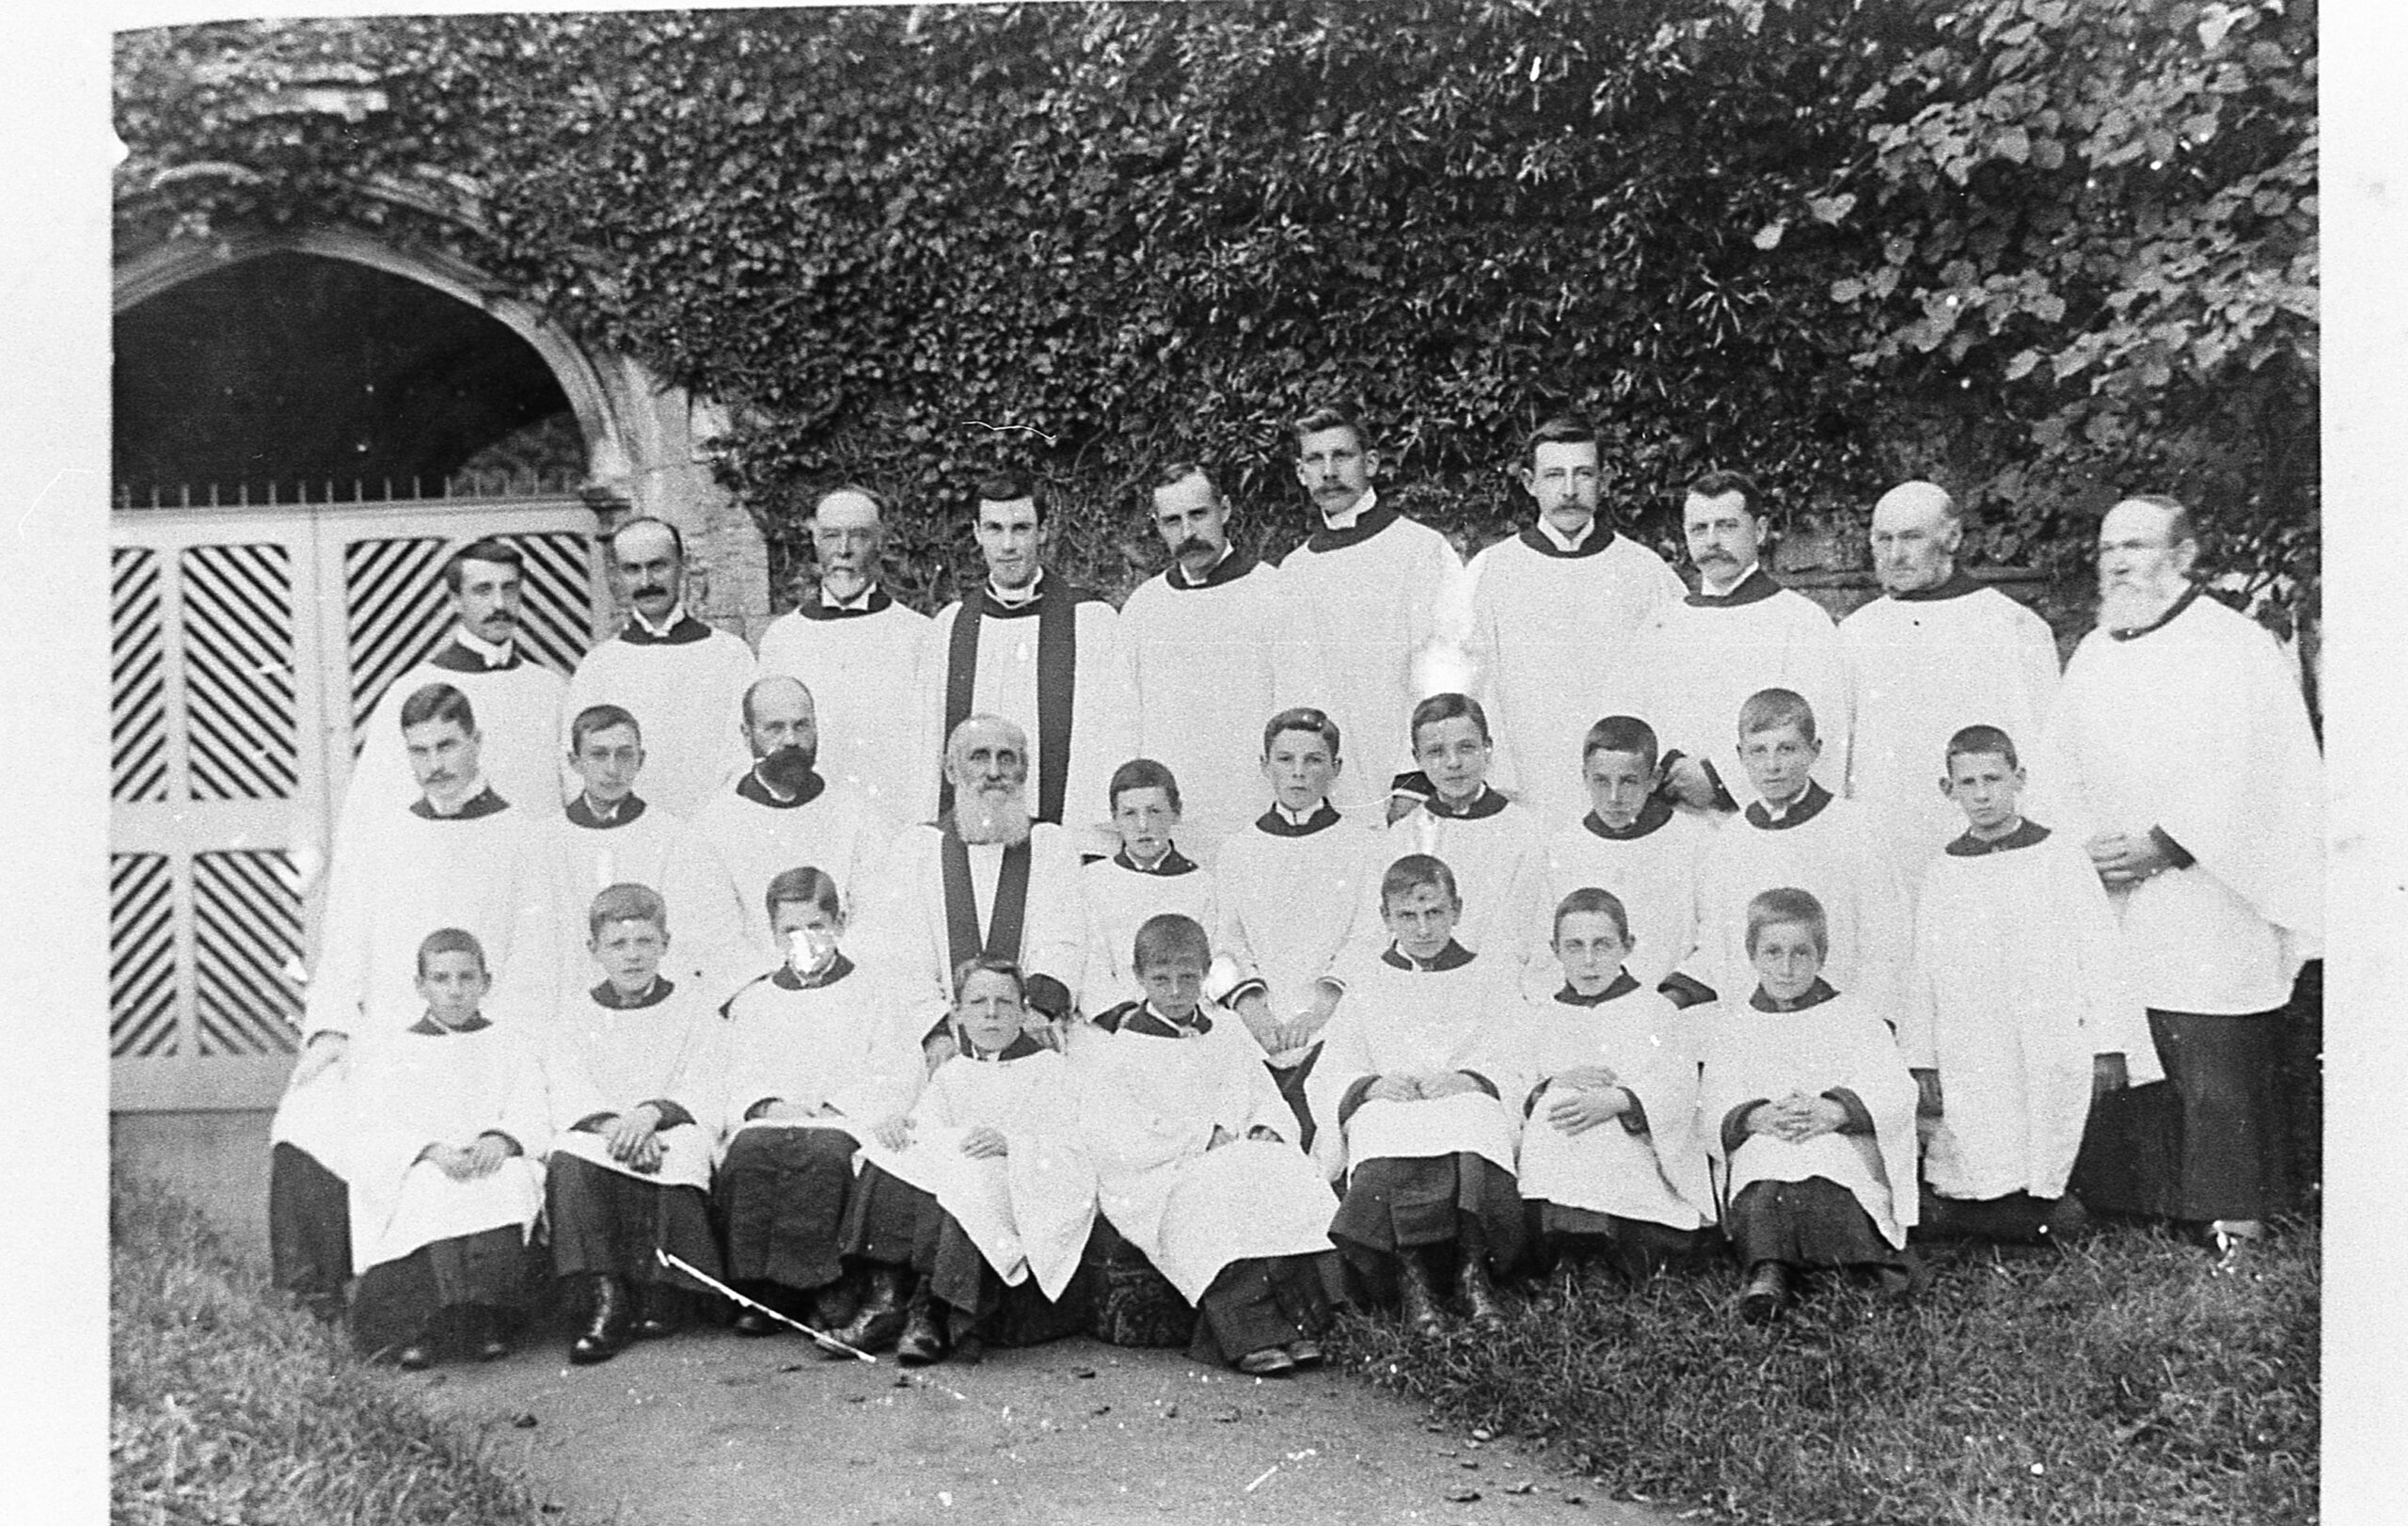 Ronald's father - the Rev. J.J. Lias (seated, with the long, white beard) - and the Clergy and Choir of St. Mary's Church, East Bergholt.<br>Photograph taken between 1892 and 1903<br />Copyright © East Bergholt Society, 1924